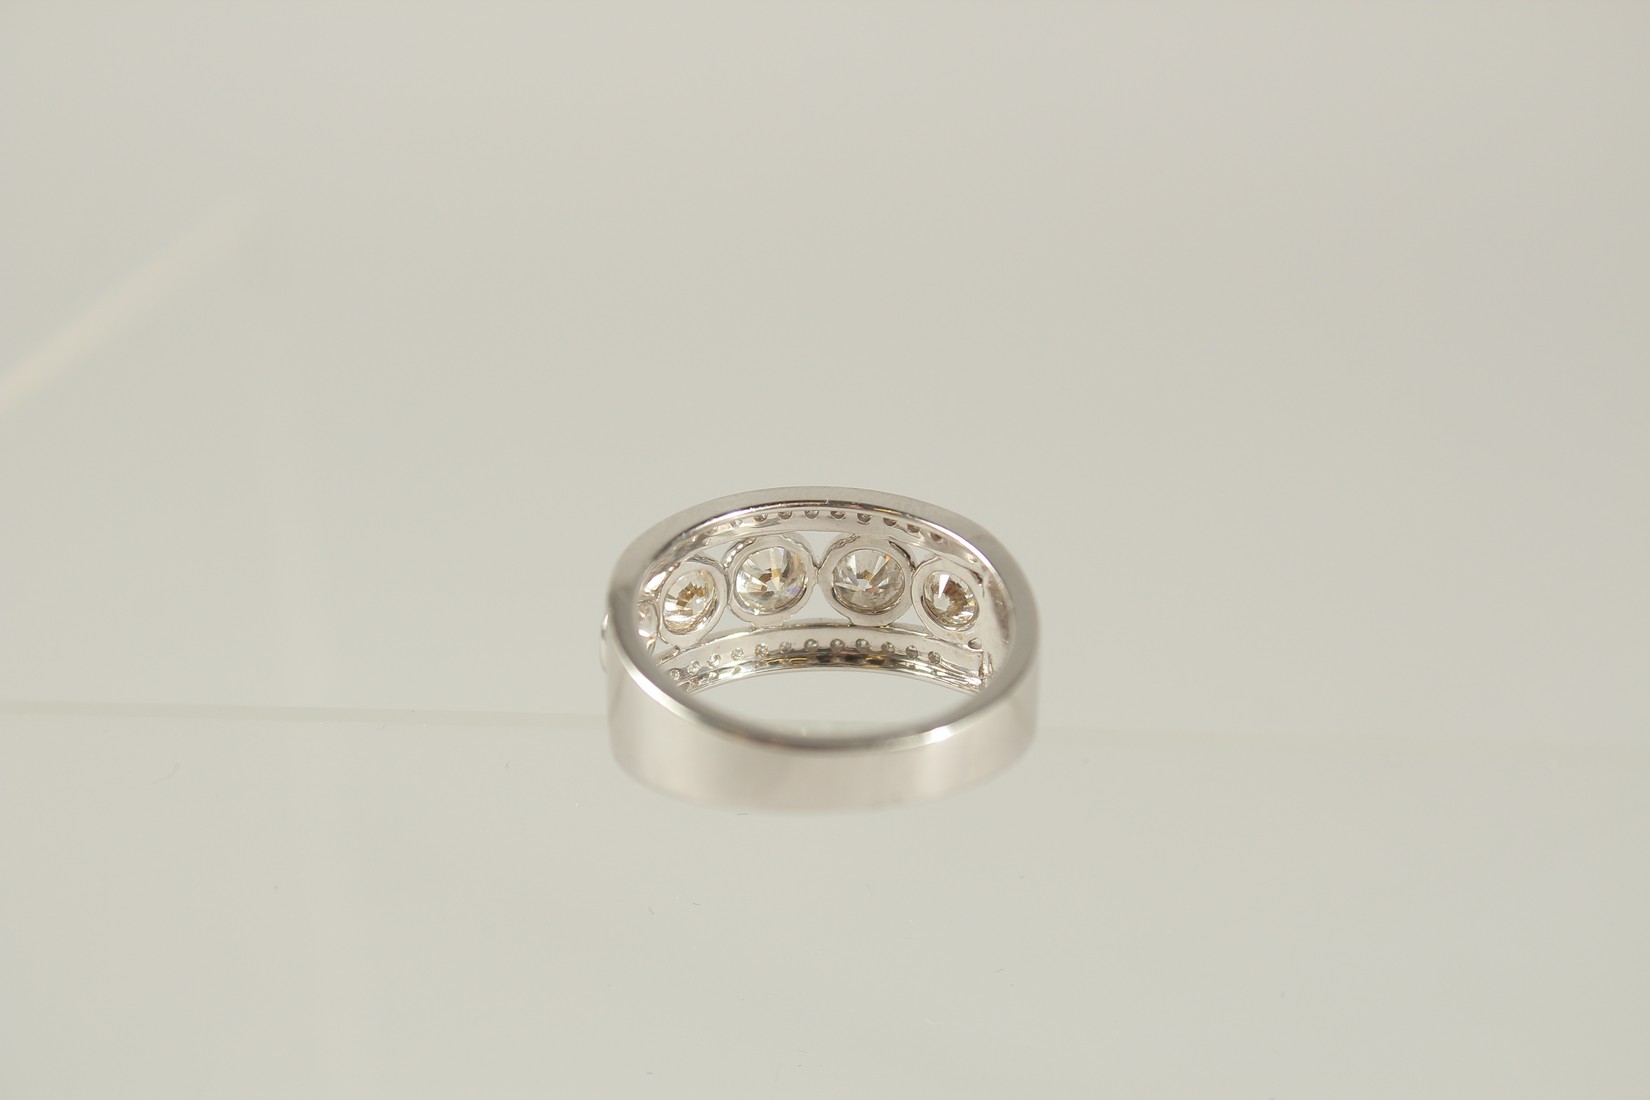 AN 18CT WHITE GOLD FIVE STONE DIAMOND RING with diamond band. - Image 2 of 3